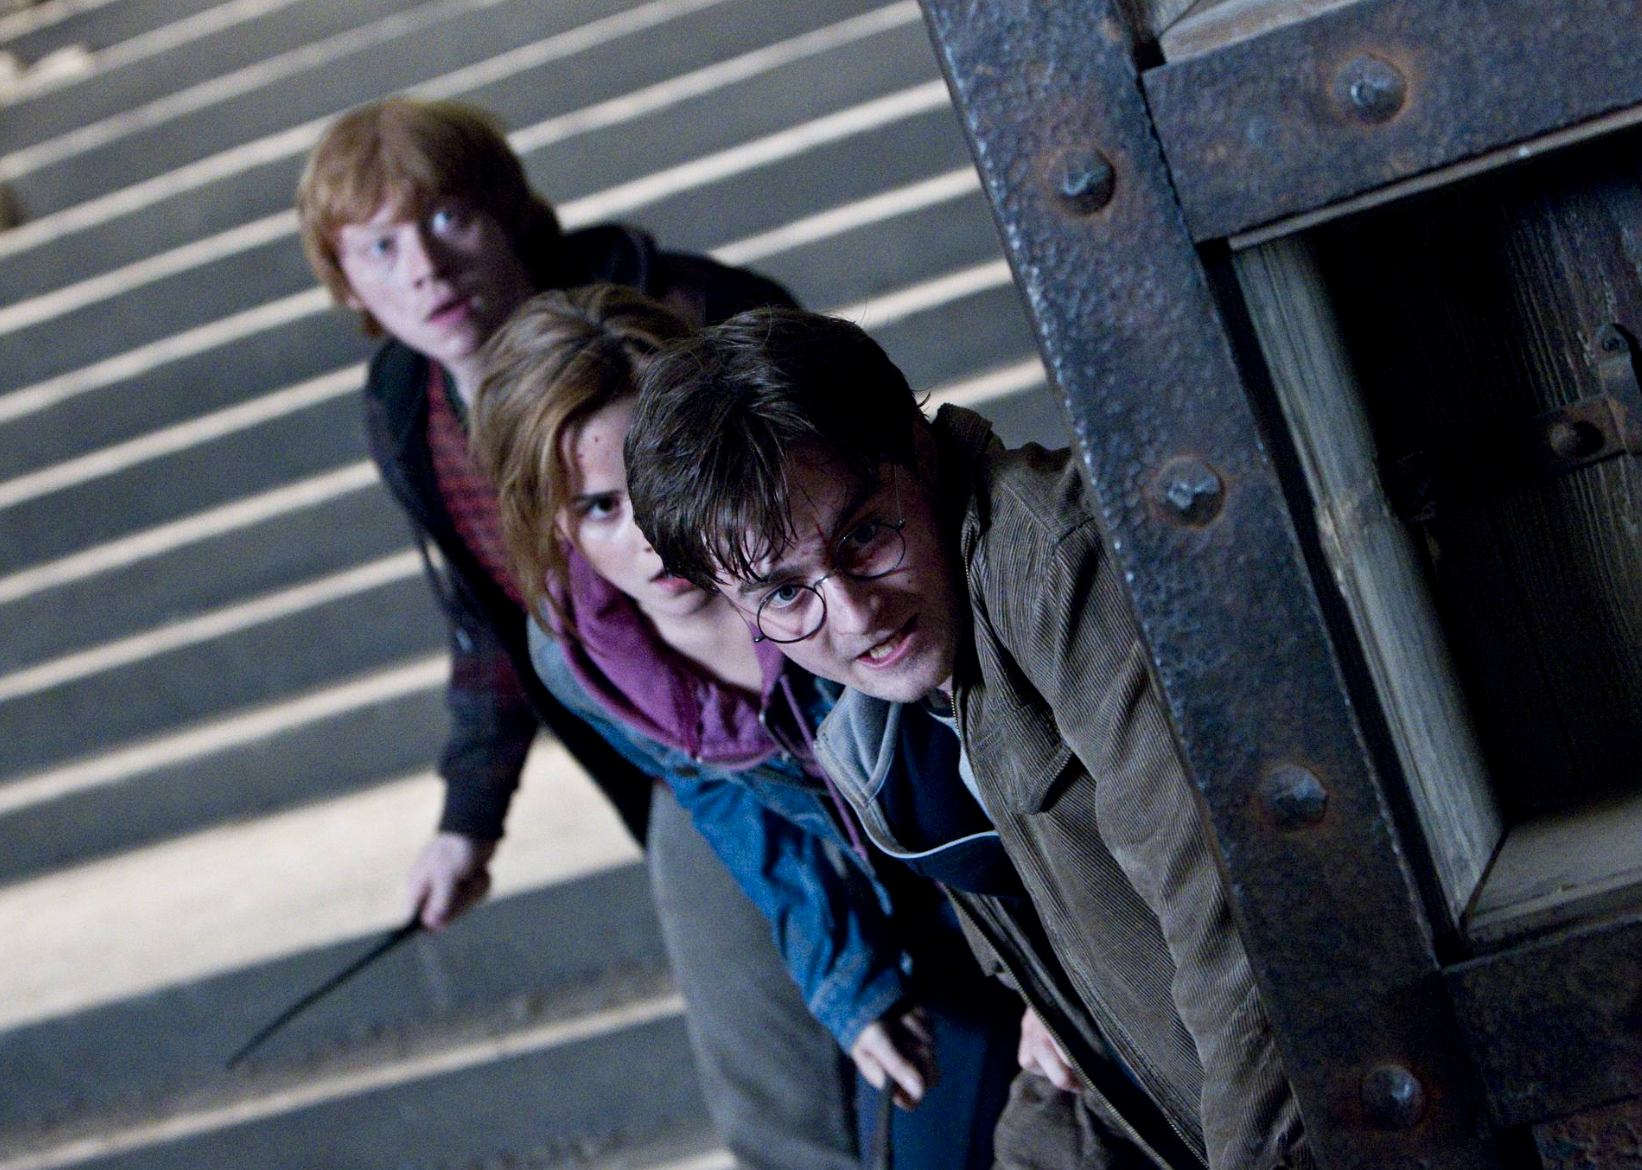 Rupert Grint, Daniel Radcliffe, and Emma Watson in "Harry Potter and the Deathly Hallows: Part 2"